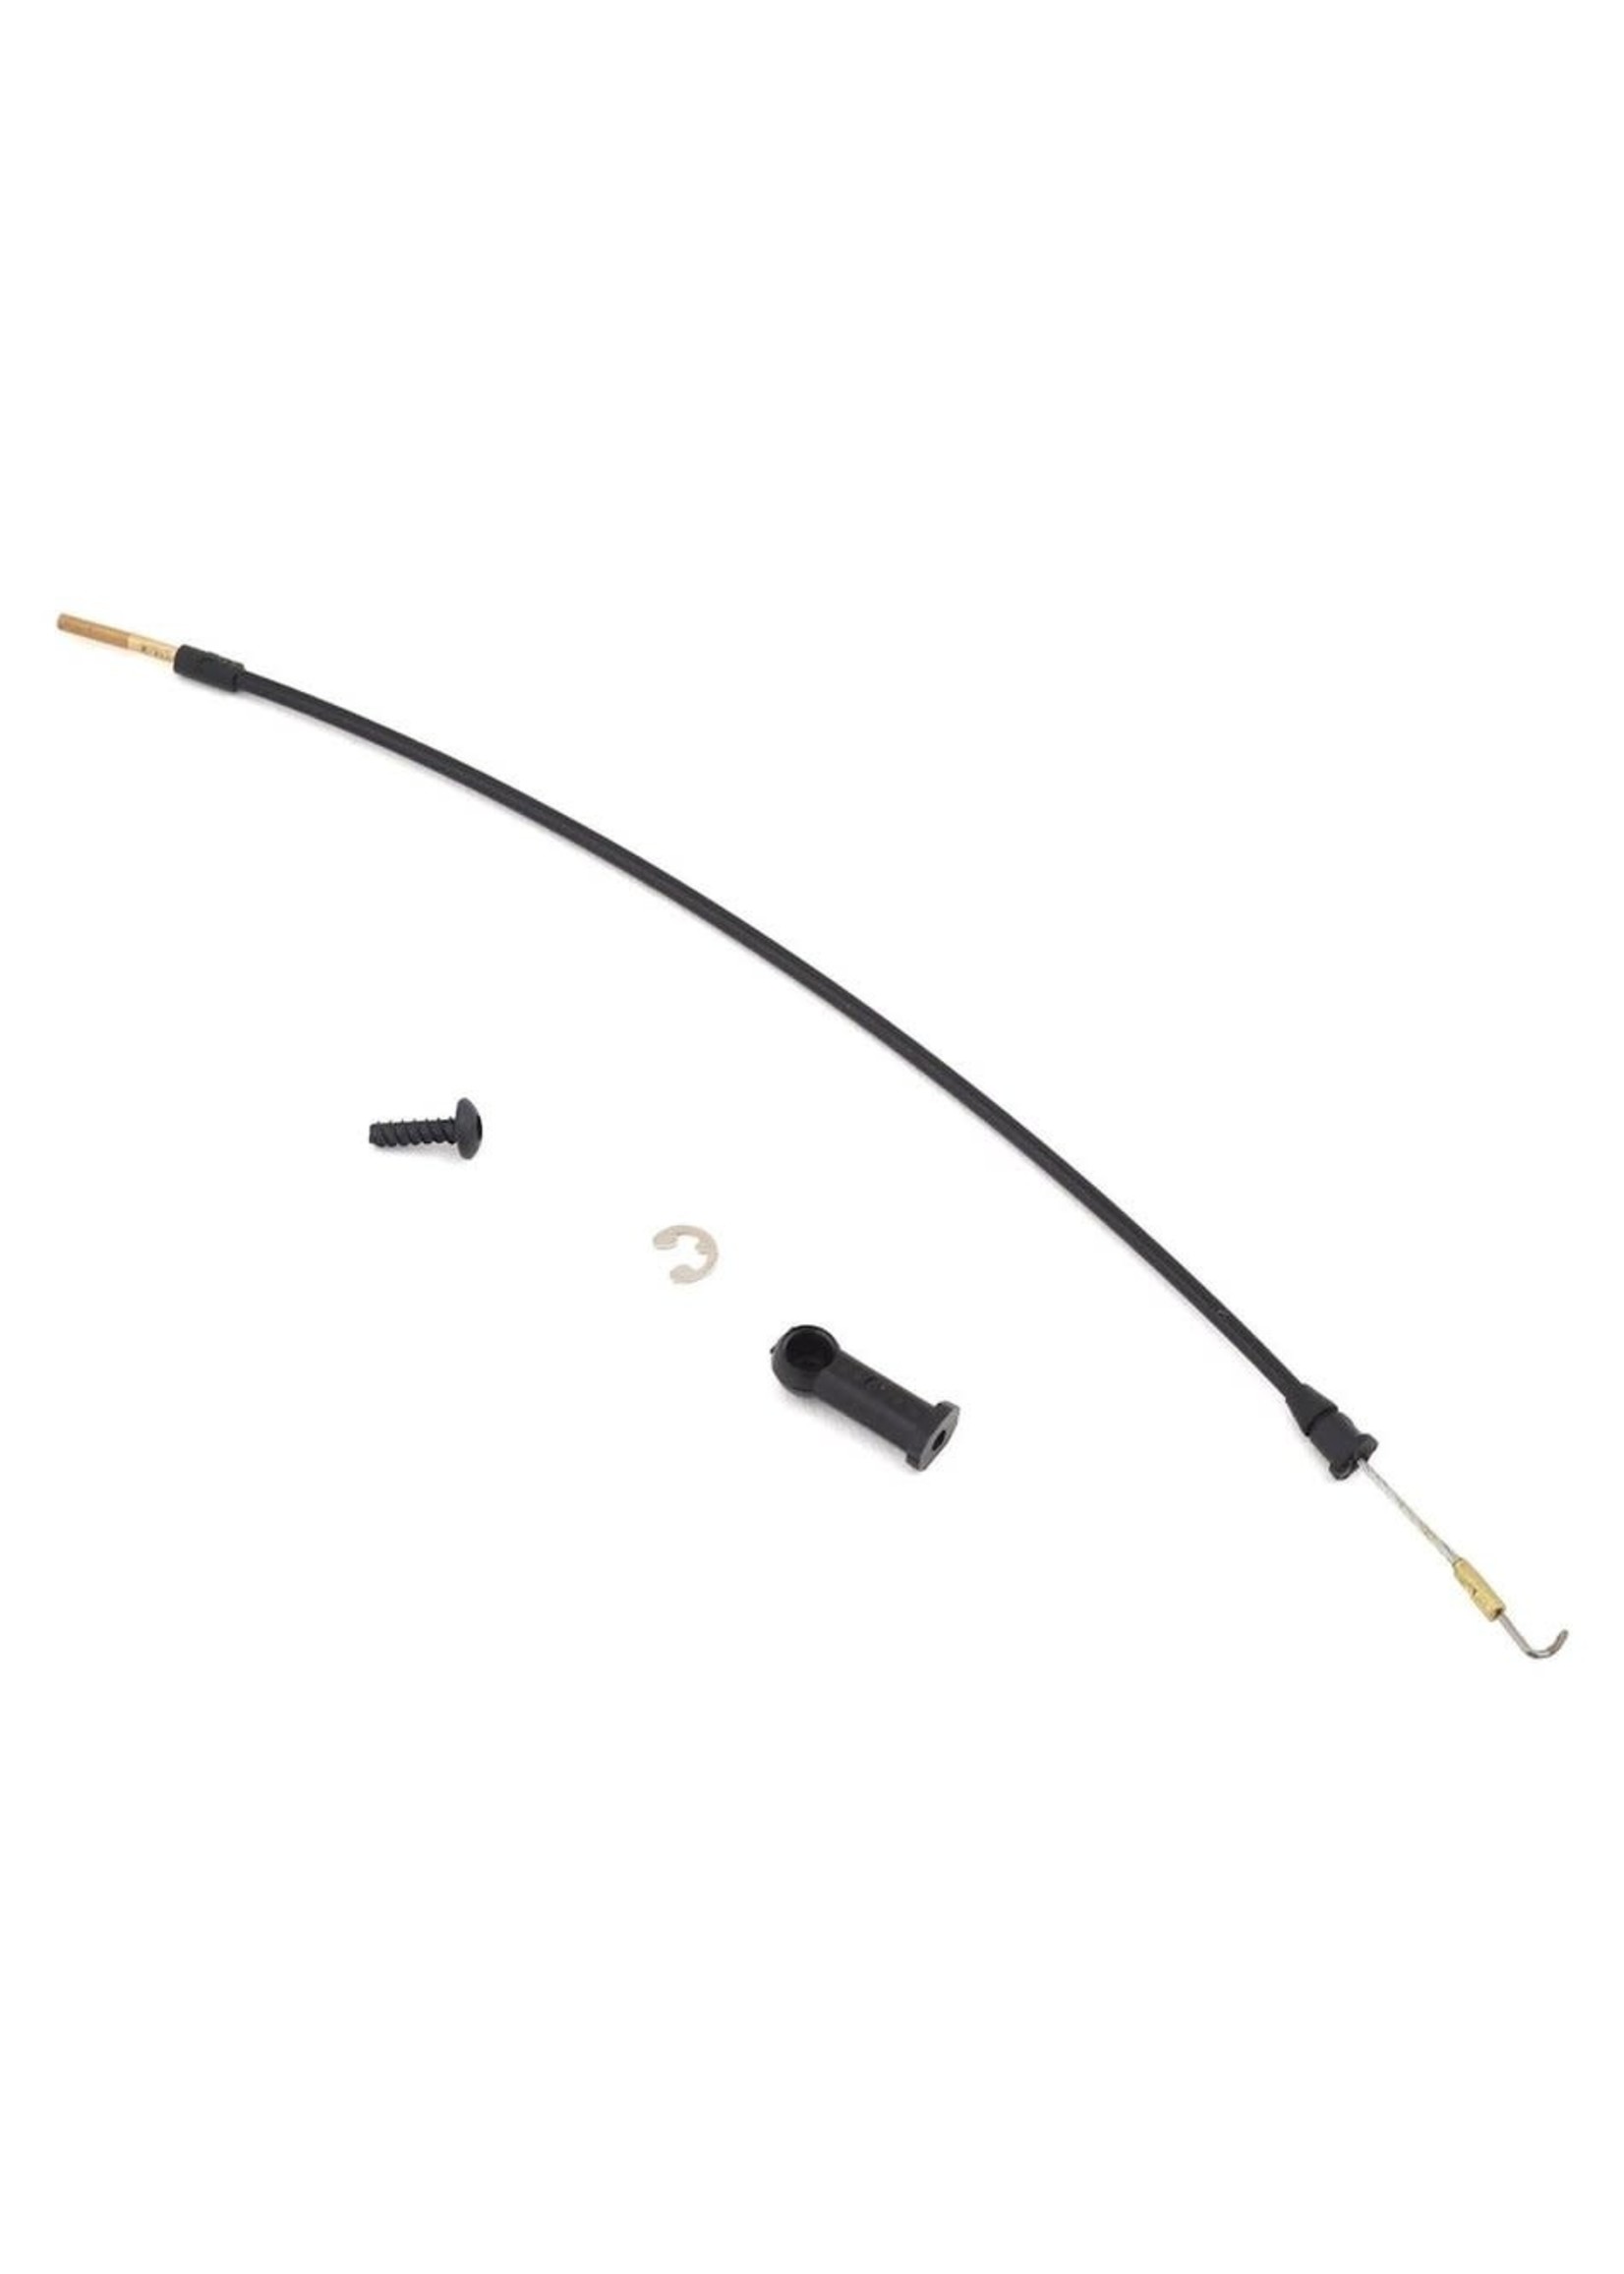 Traxxas 8147 Cable, T-lock (medium) (for use with TRX-4 Long Arm Lift Kit)